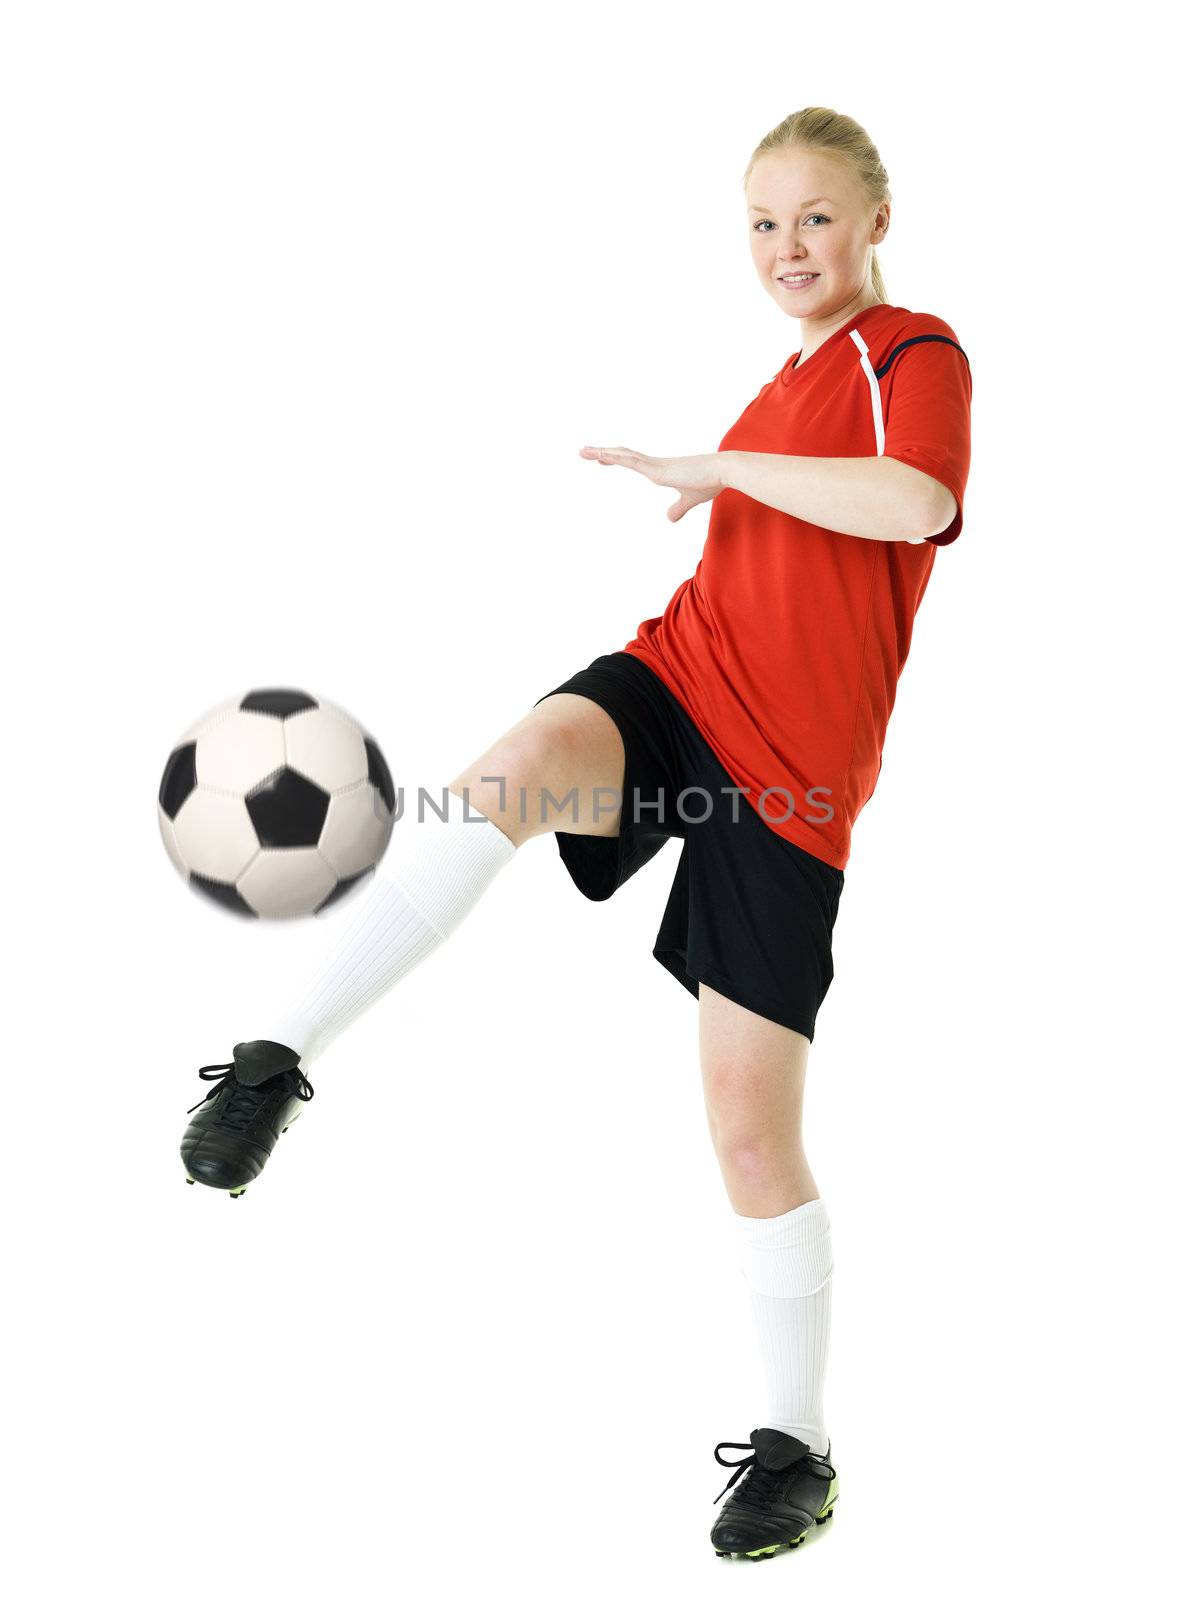 Blond soccer woman isolated on white background